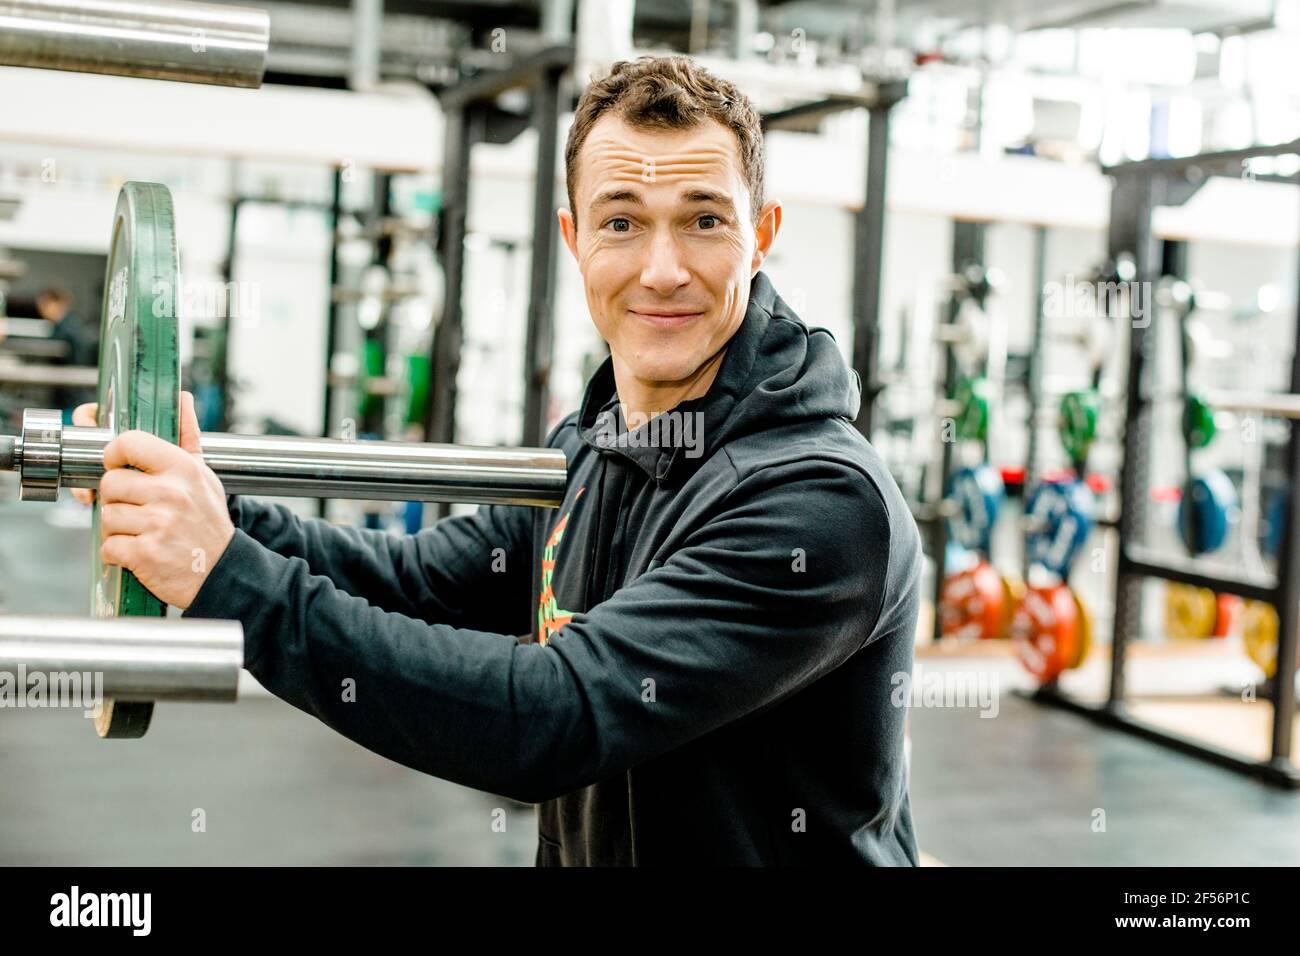 Smiling male athlete in sports clothing holding weights disc in gym Stock Photo